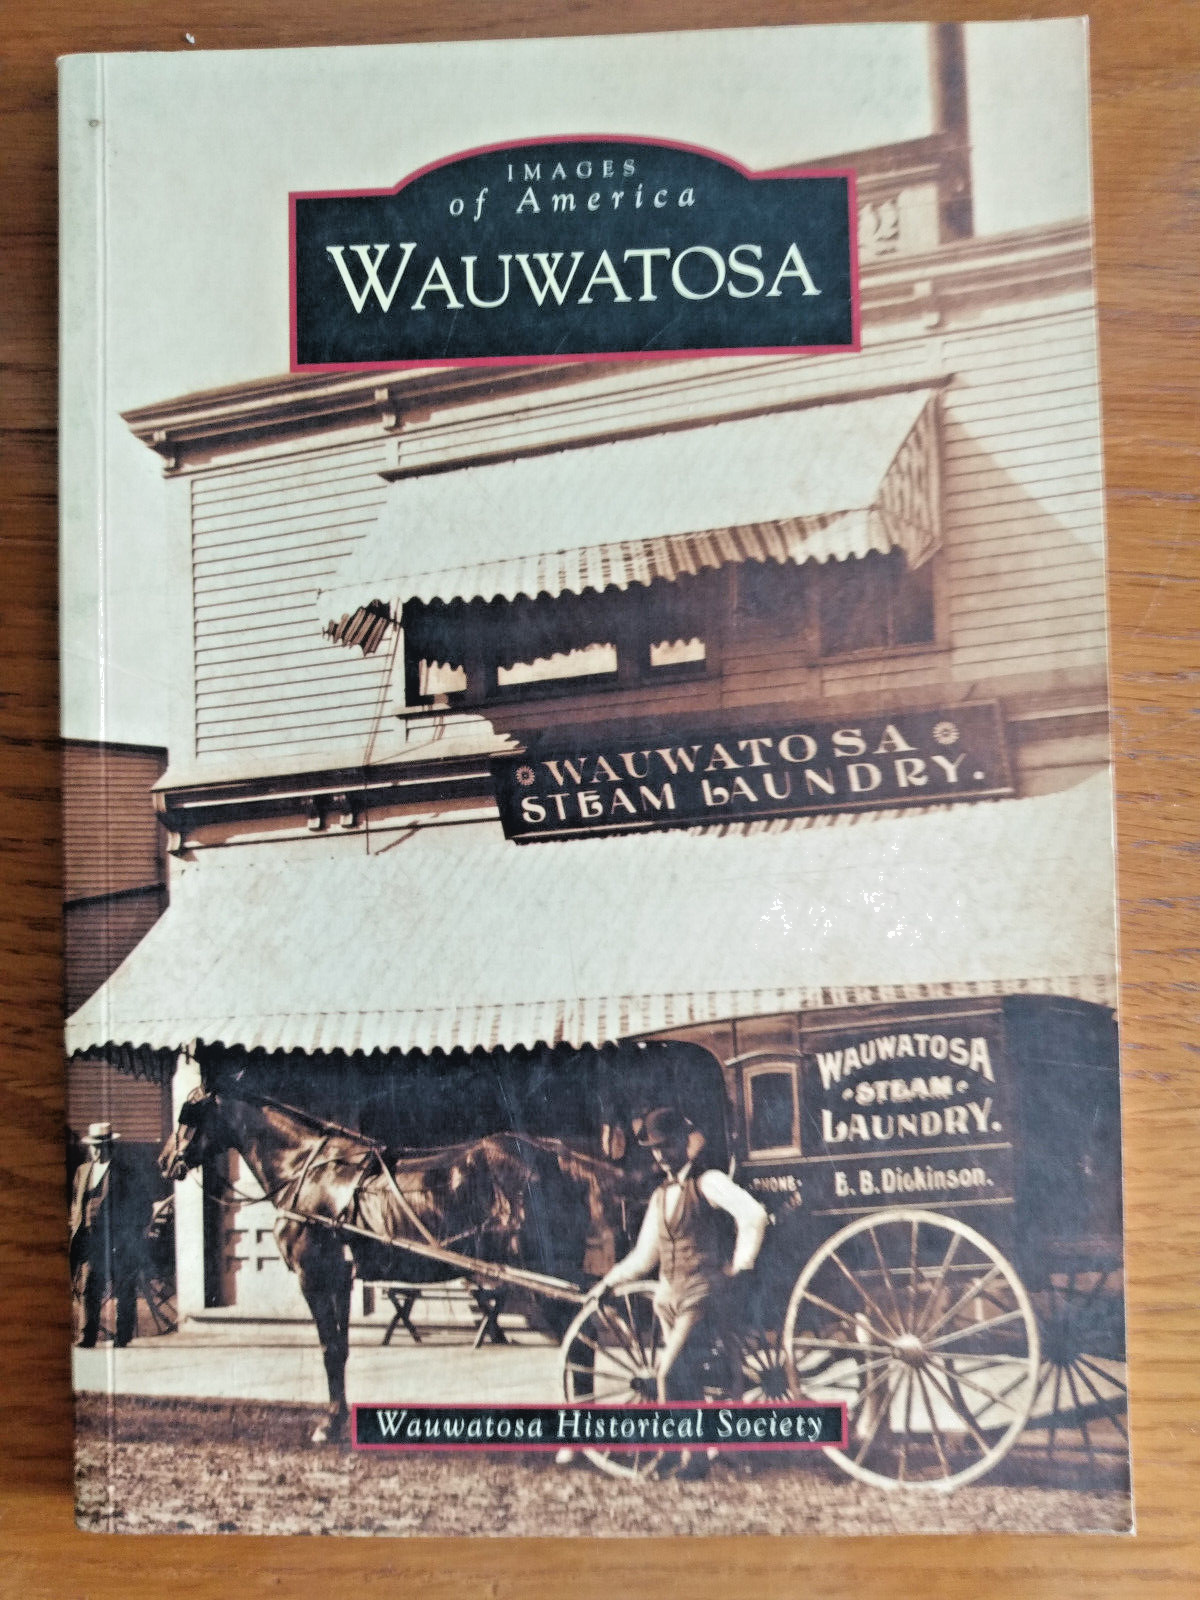 Primary image for Images of America: Wauwatosa Wisconsin 